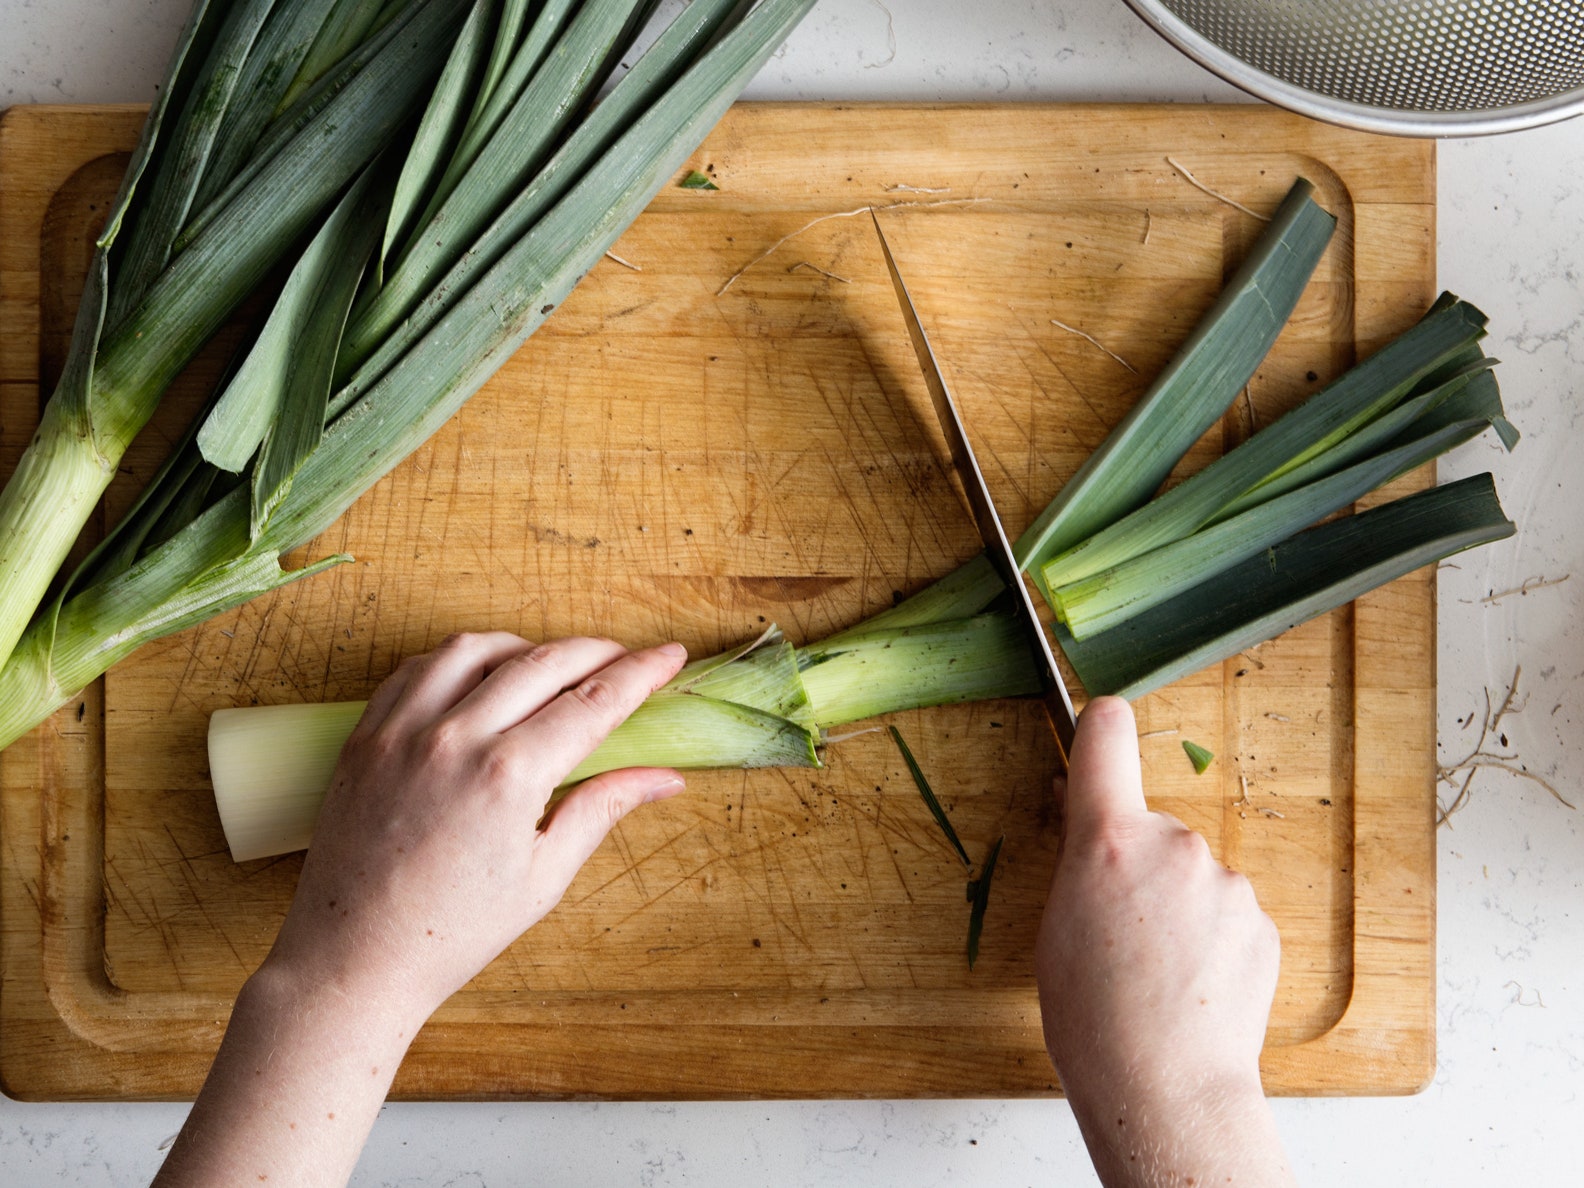 Produce of the Month: Leeks